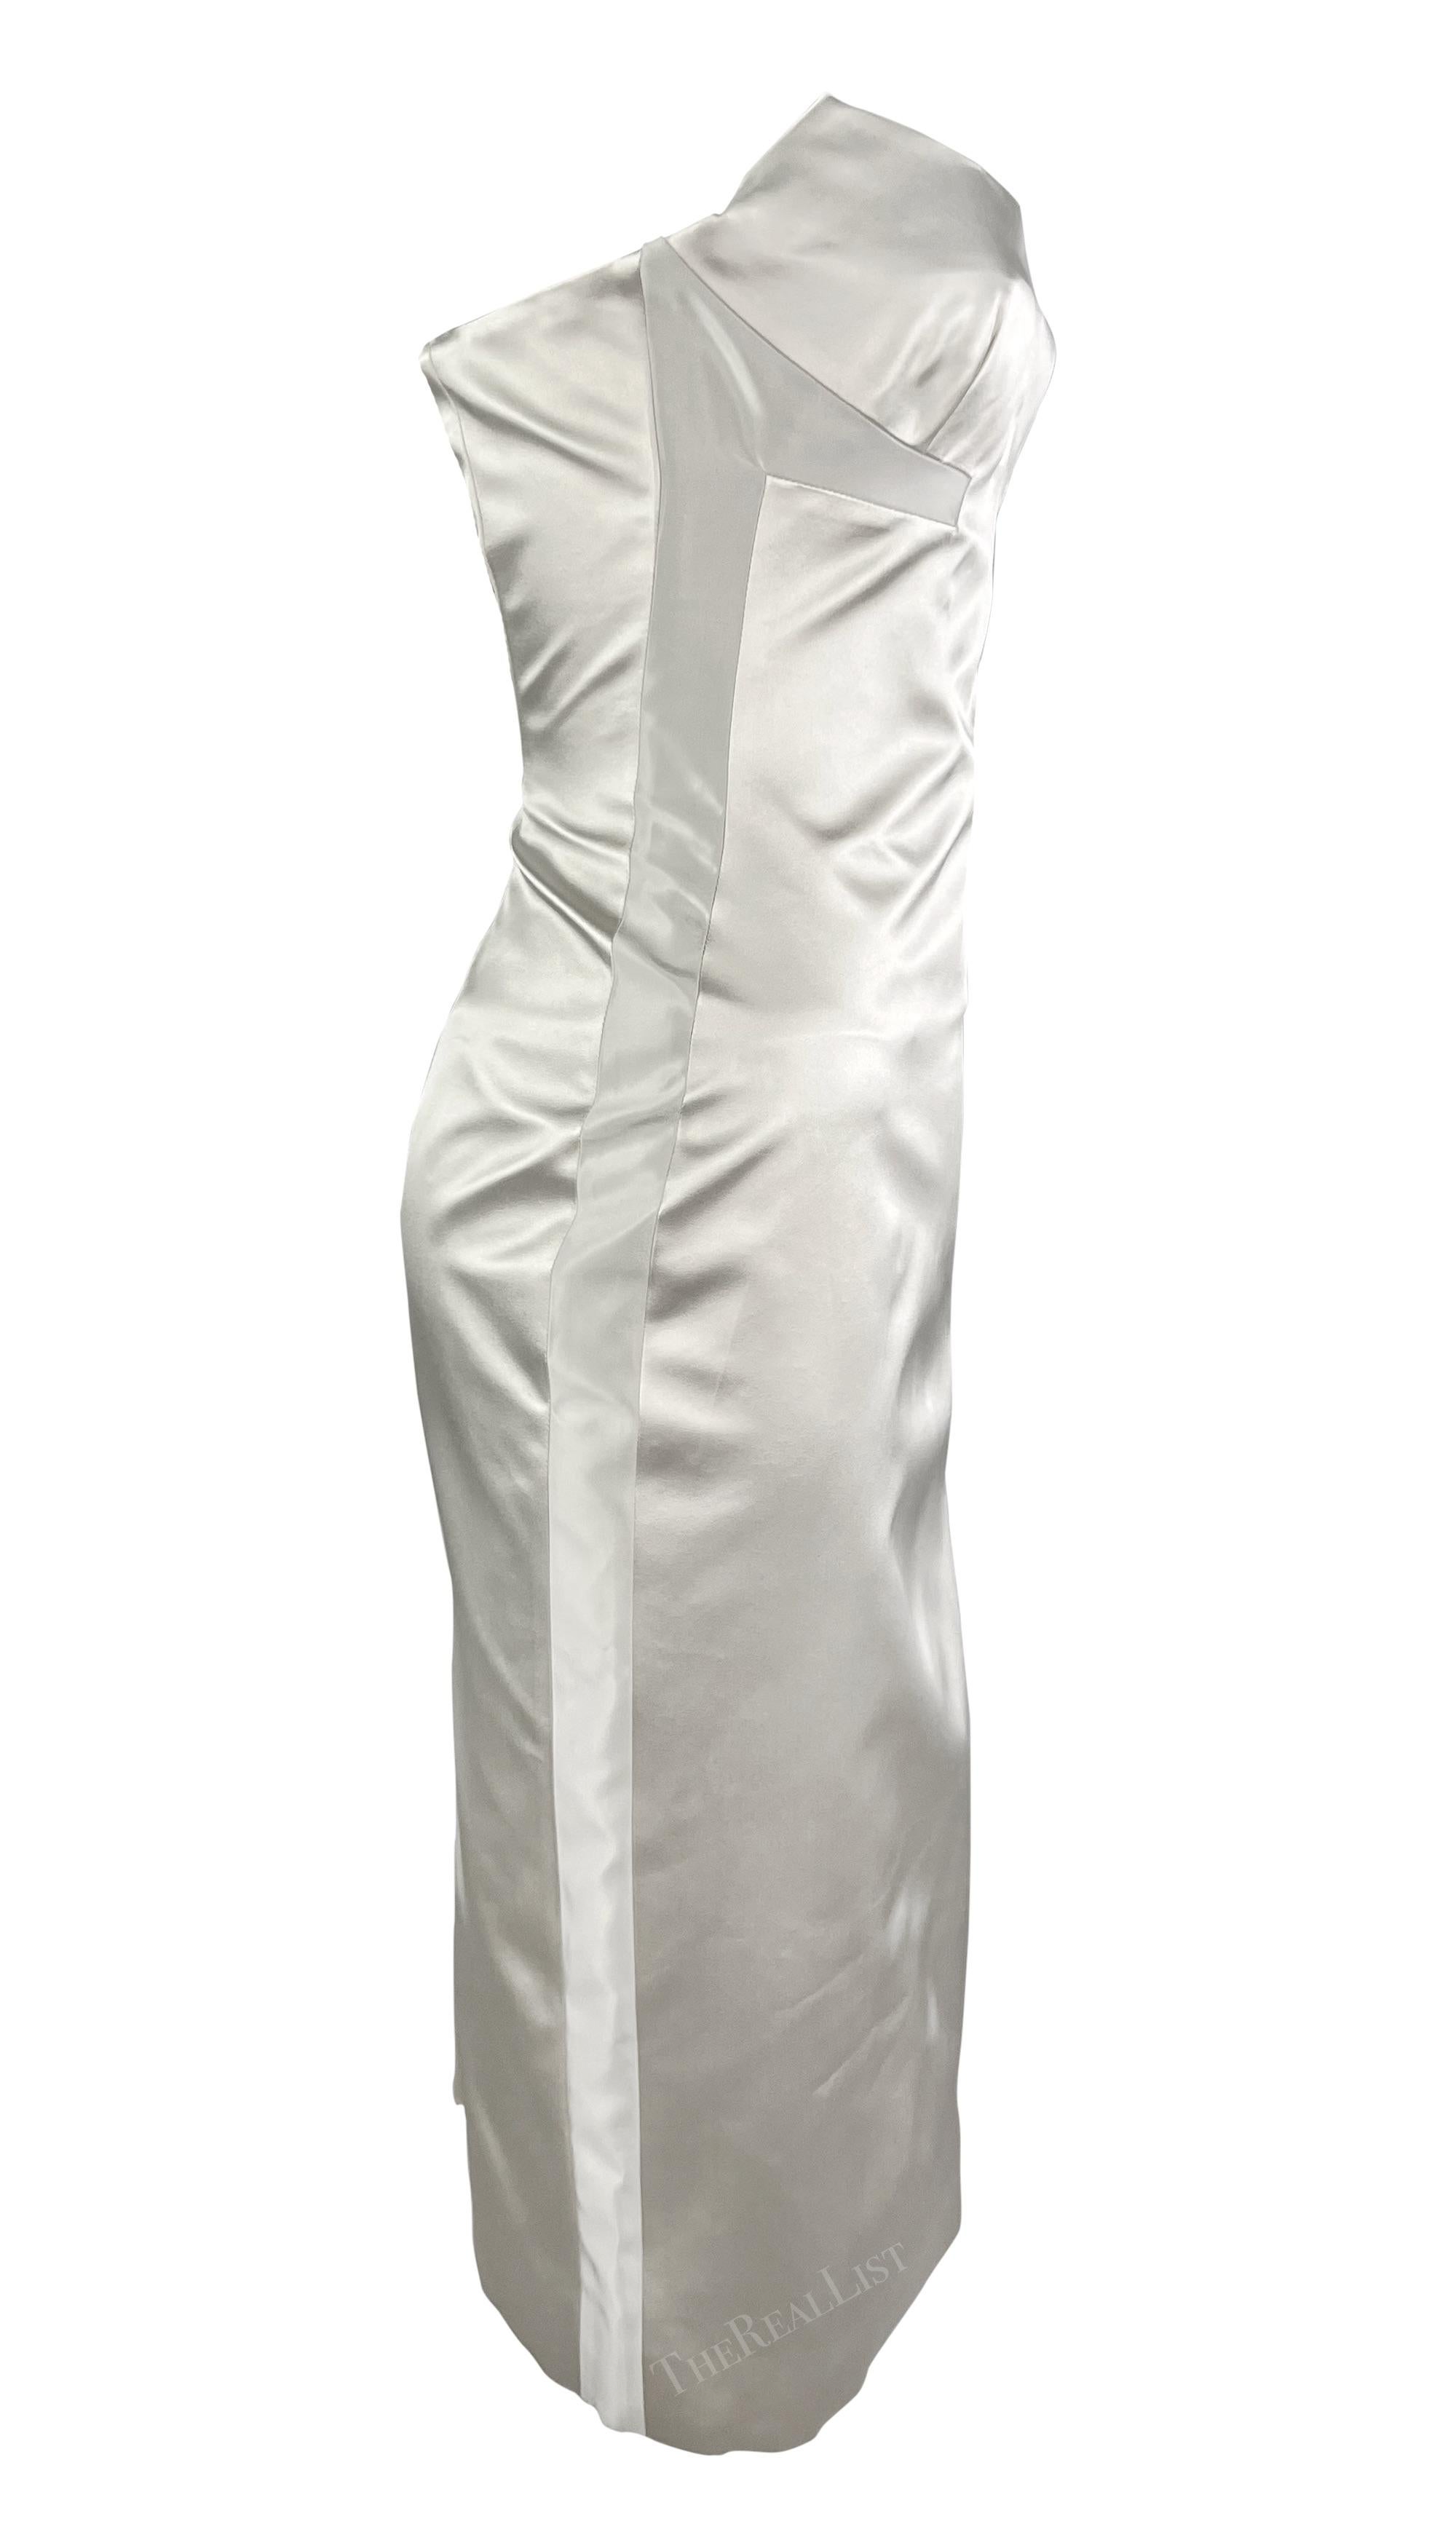 NWT S/S 2001 Gucci by Tom Ford Runway Ad Corset White Silk Satin Strapless Dress For Sale 8